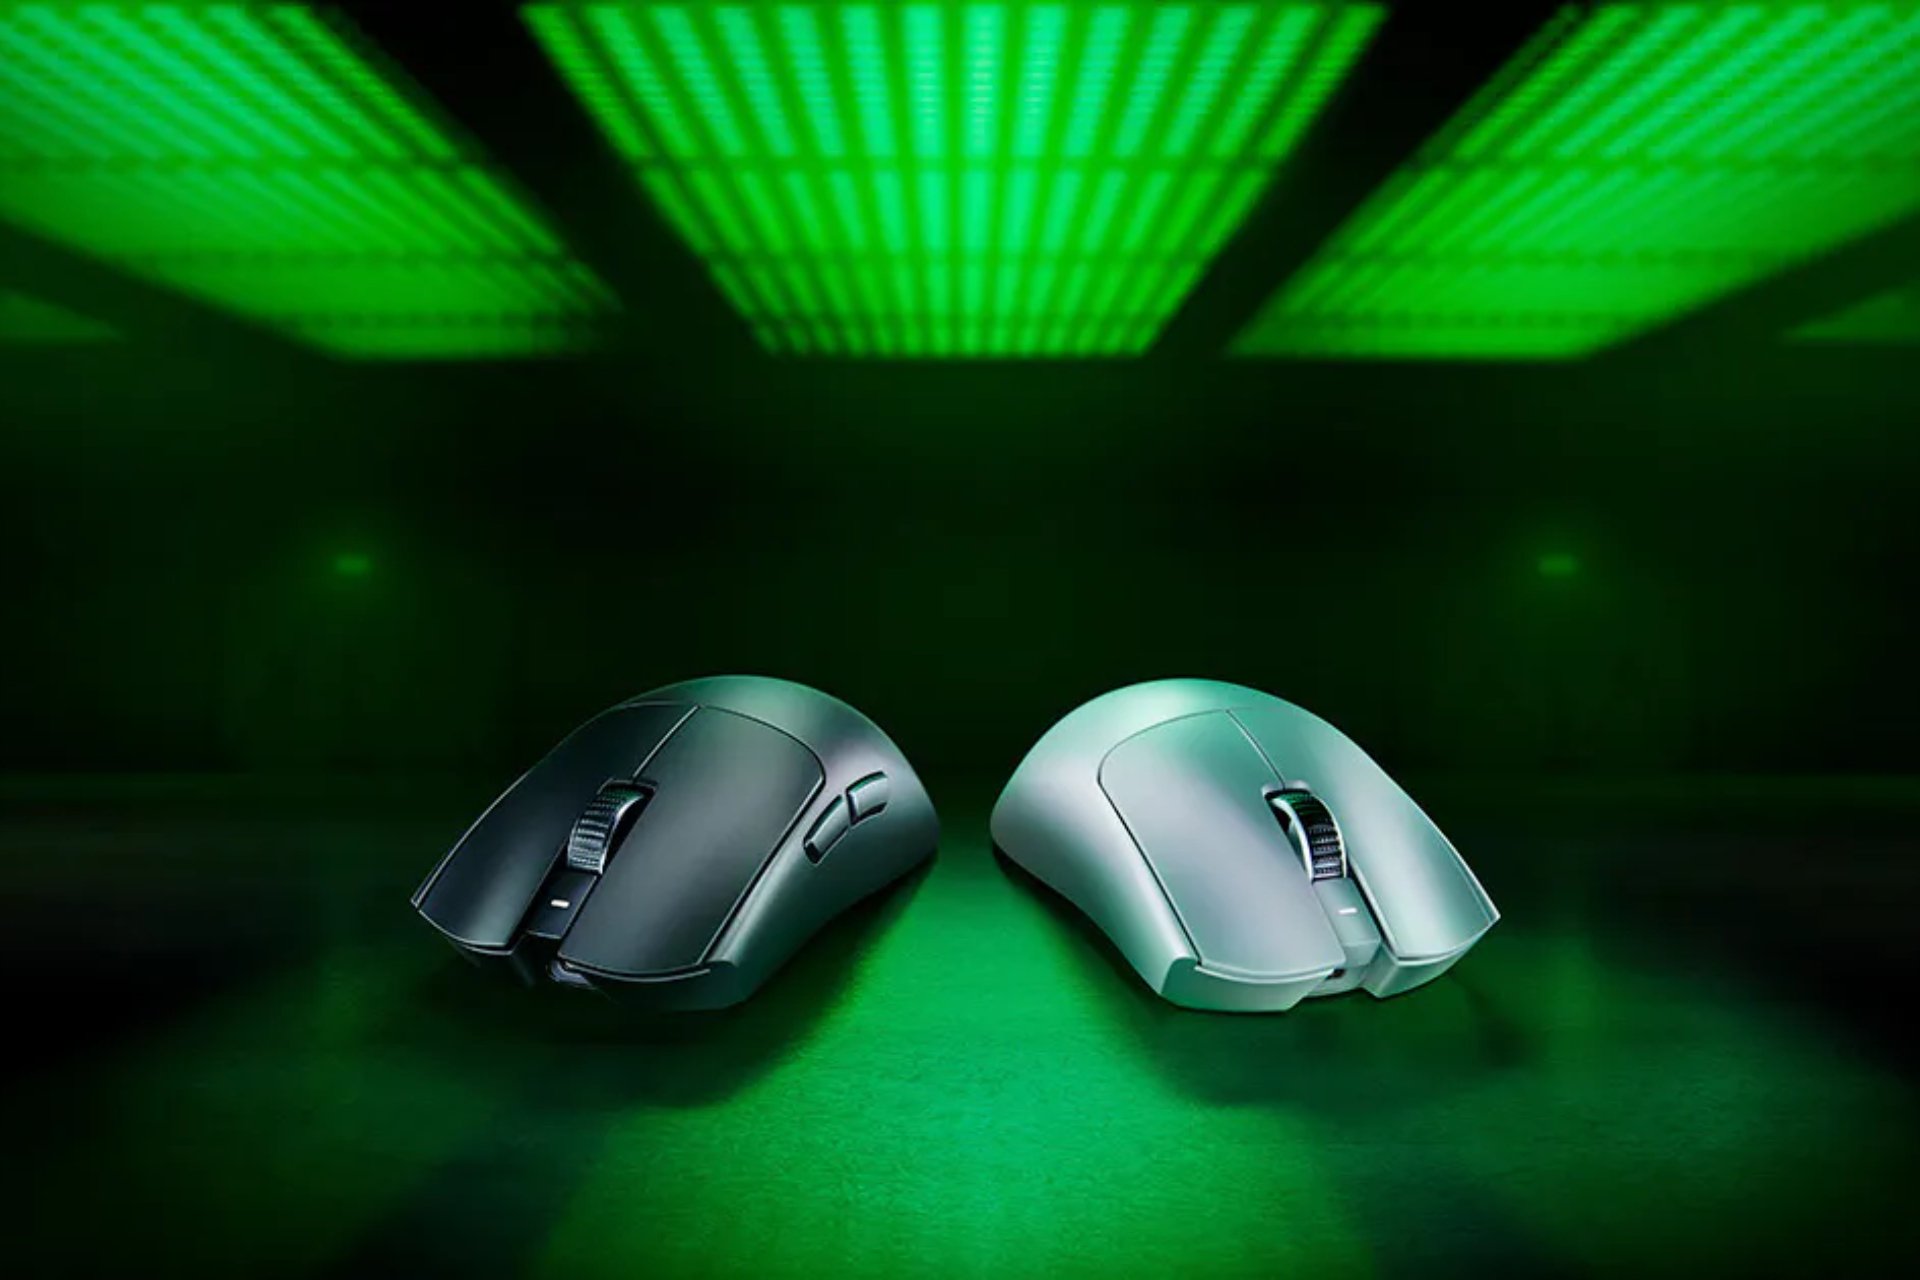 Razer VIPER V3 PRO gaming mouse promises that perfect headshot with a new optical sensor